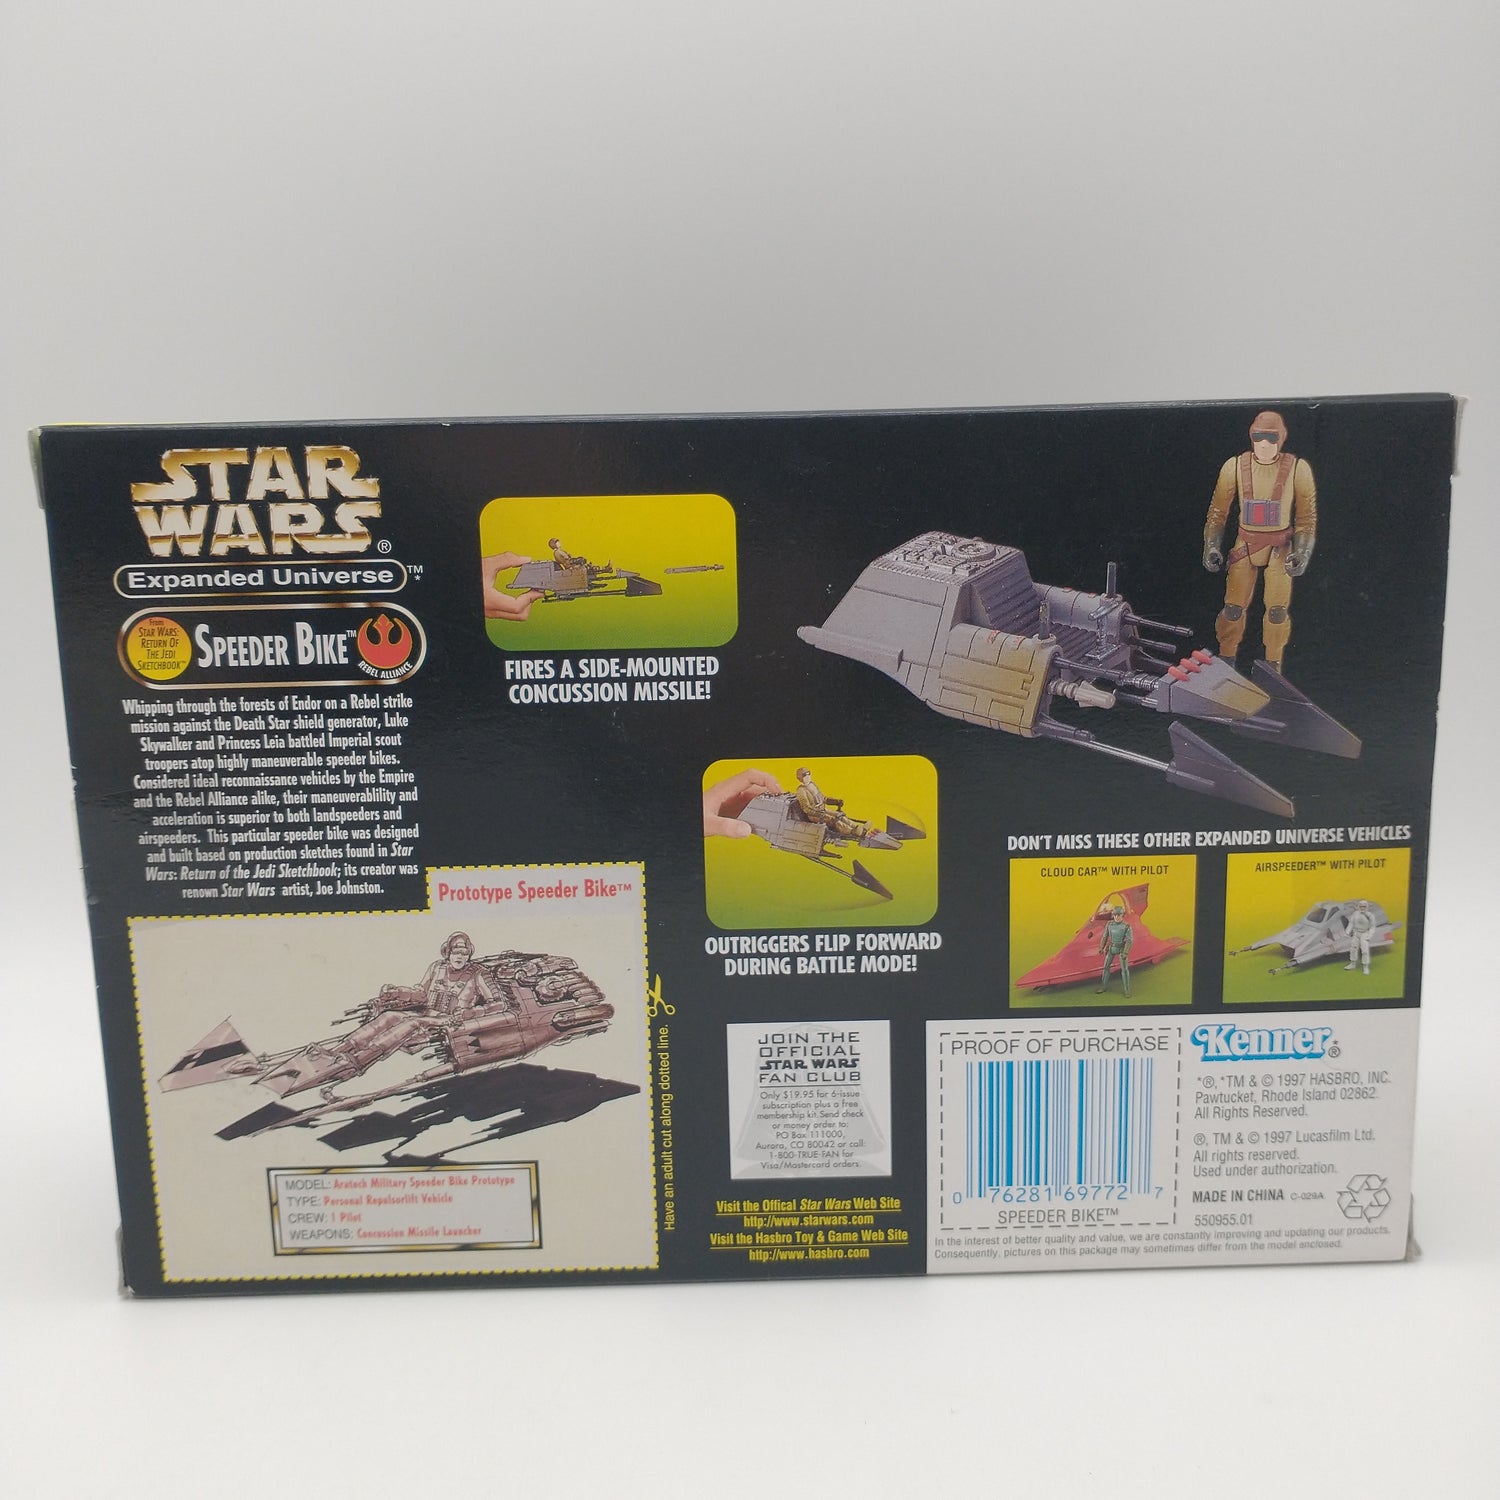 A picture of the back of the card featuring pictures of other action figures available along with various playsets available for purchase.